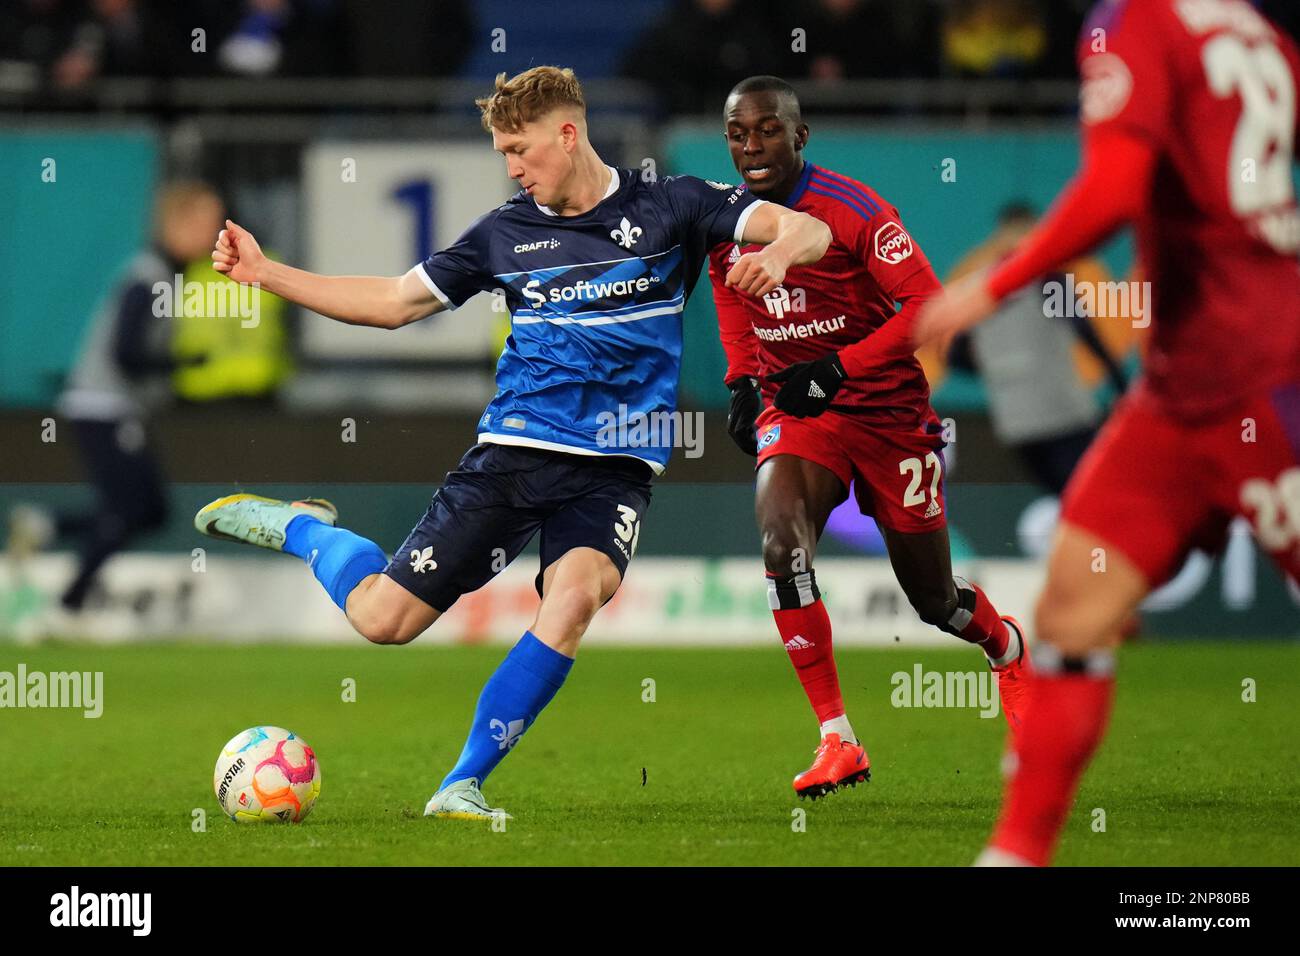 Darmstadt, Germany. 25th Feb, 2023. Soccer: 2nd Bundesliga, Darmstadt 98 - Hamburger SV, Matchday 22, Merck-Stadion am Böllenfalltor. Darmstadt's Clemens Riedel (l) and Hamburg's Jean-Luc Dompe fight for the ball. Credit: Thomas Frey/dpa - IMPORTANT NOTE: In accordance with the requirements of the DFL Deutsche Fußball Liga and the DFB Deutscher Fußball-Bund, it is prohibited to use or have used photographs taken in the stadium and/or of the match in the form of sequence pictures and/or video-like photo series./dpa/Alamy Live News Stock Photo